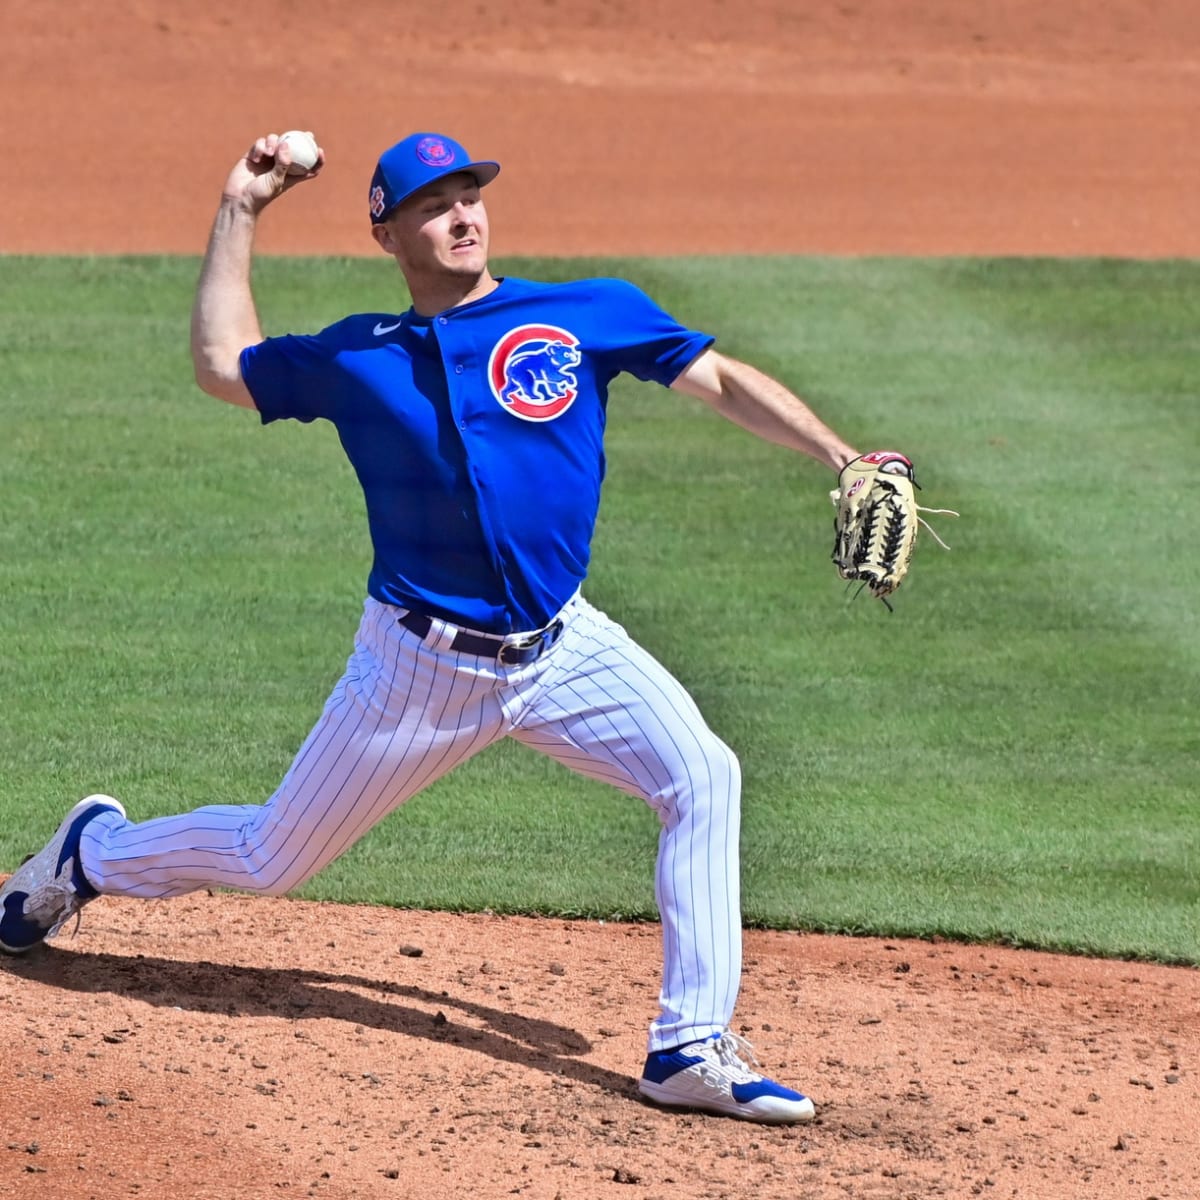 Cubs' 2023 rotation far from settled - Chicago Sun-Times